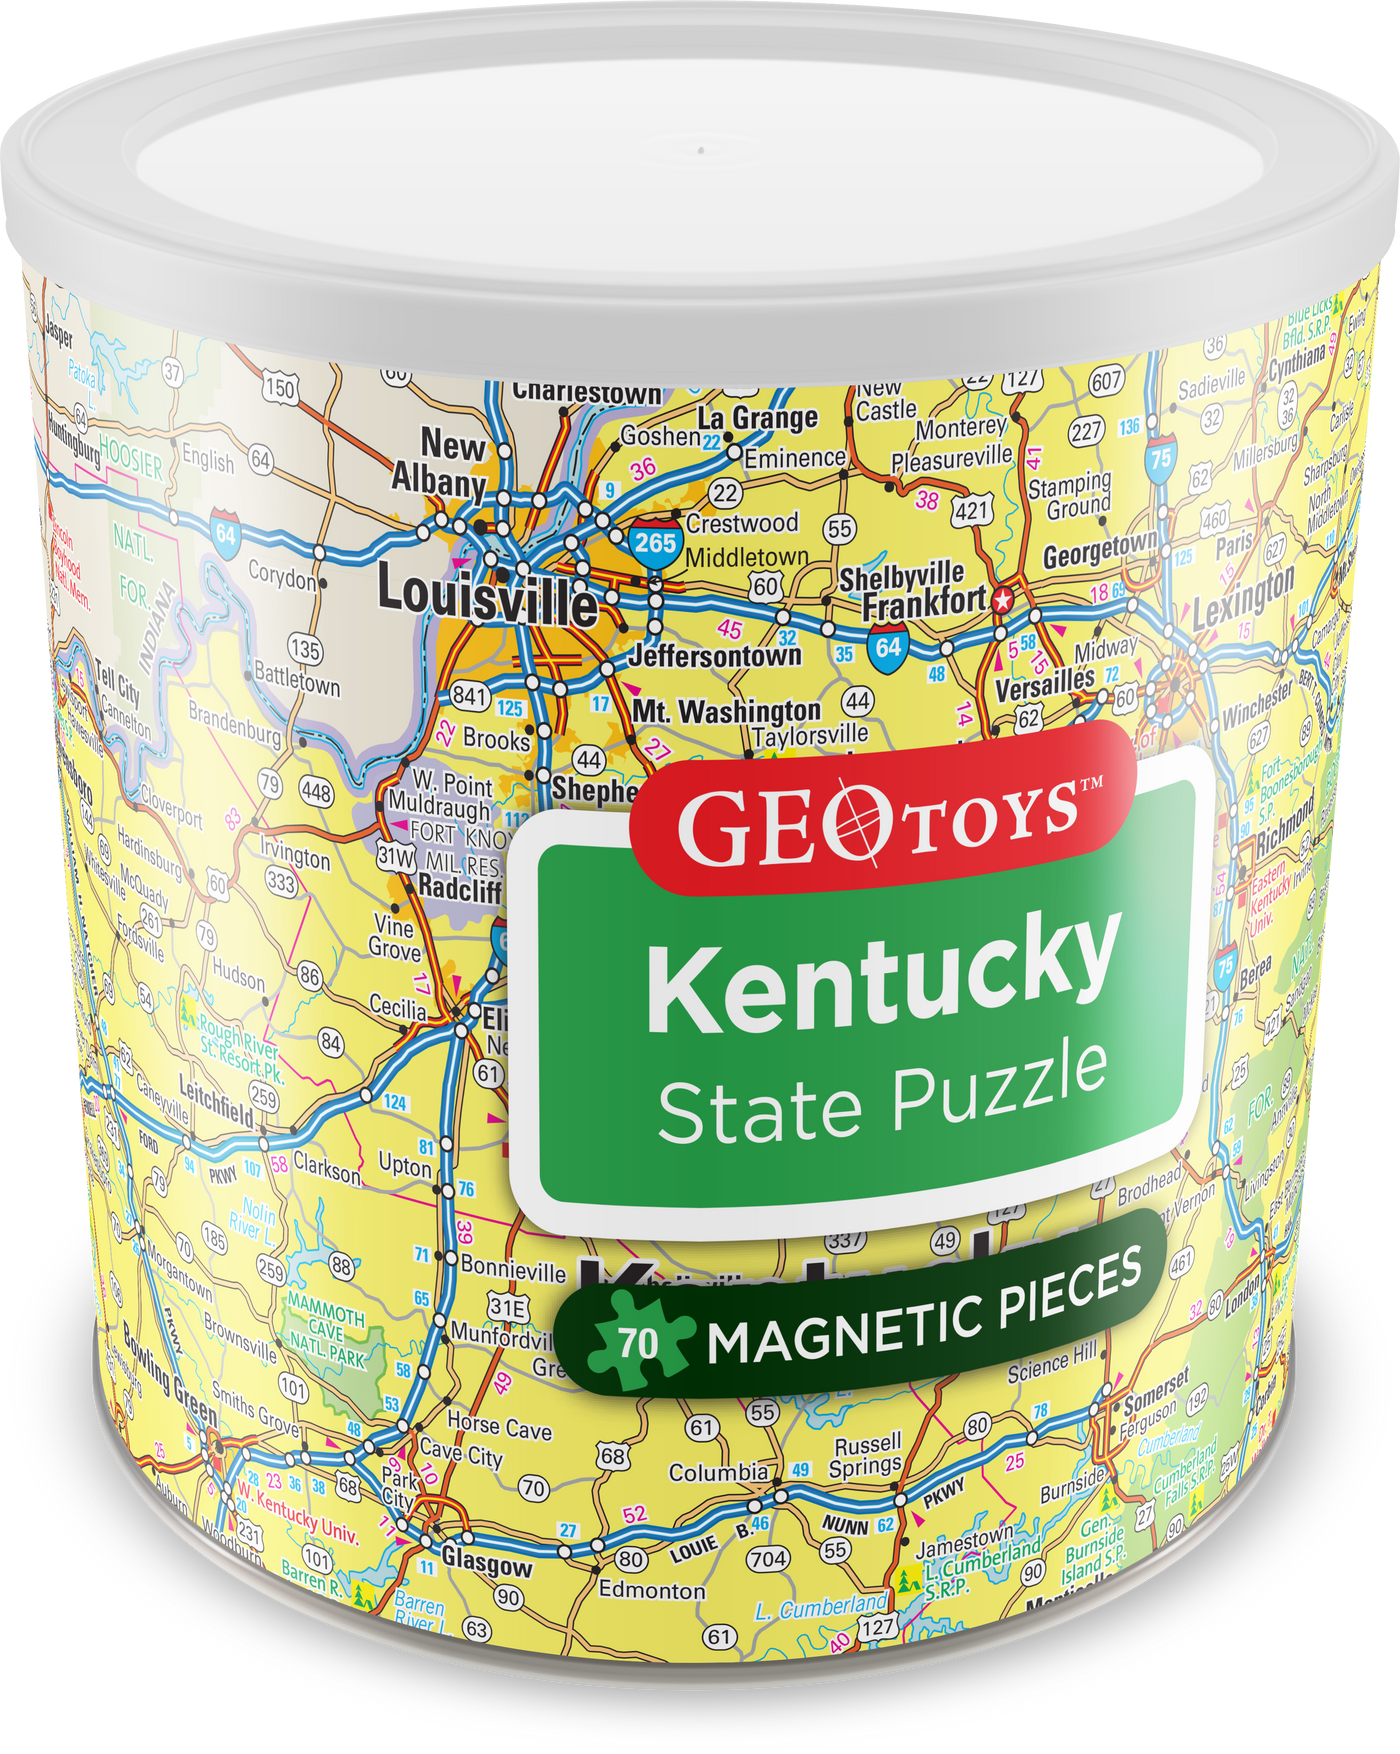 70 Piece Magnetic Puzzle - Kentucky